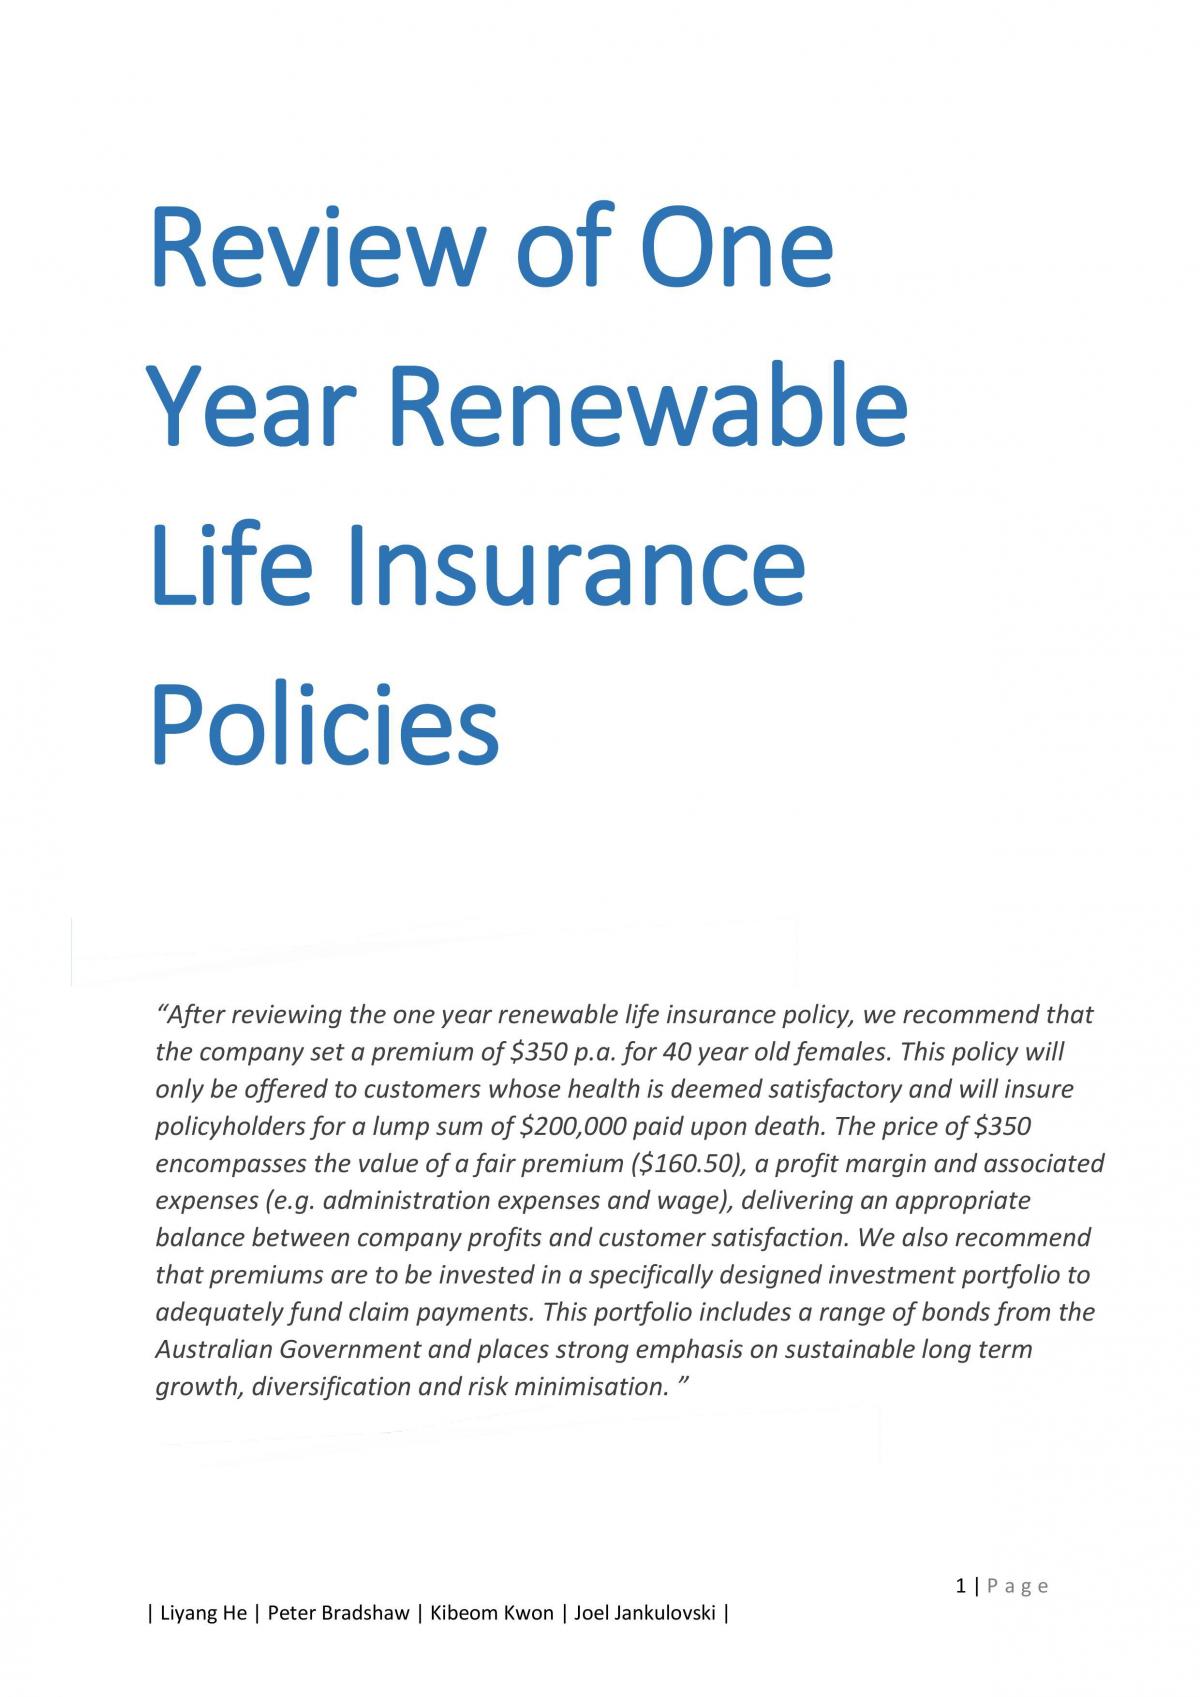 ACTL1101 Group Case Study Insurance Product Review - Page 1